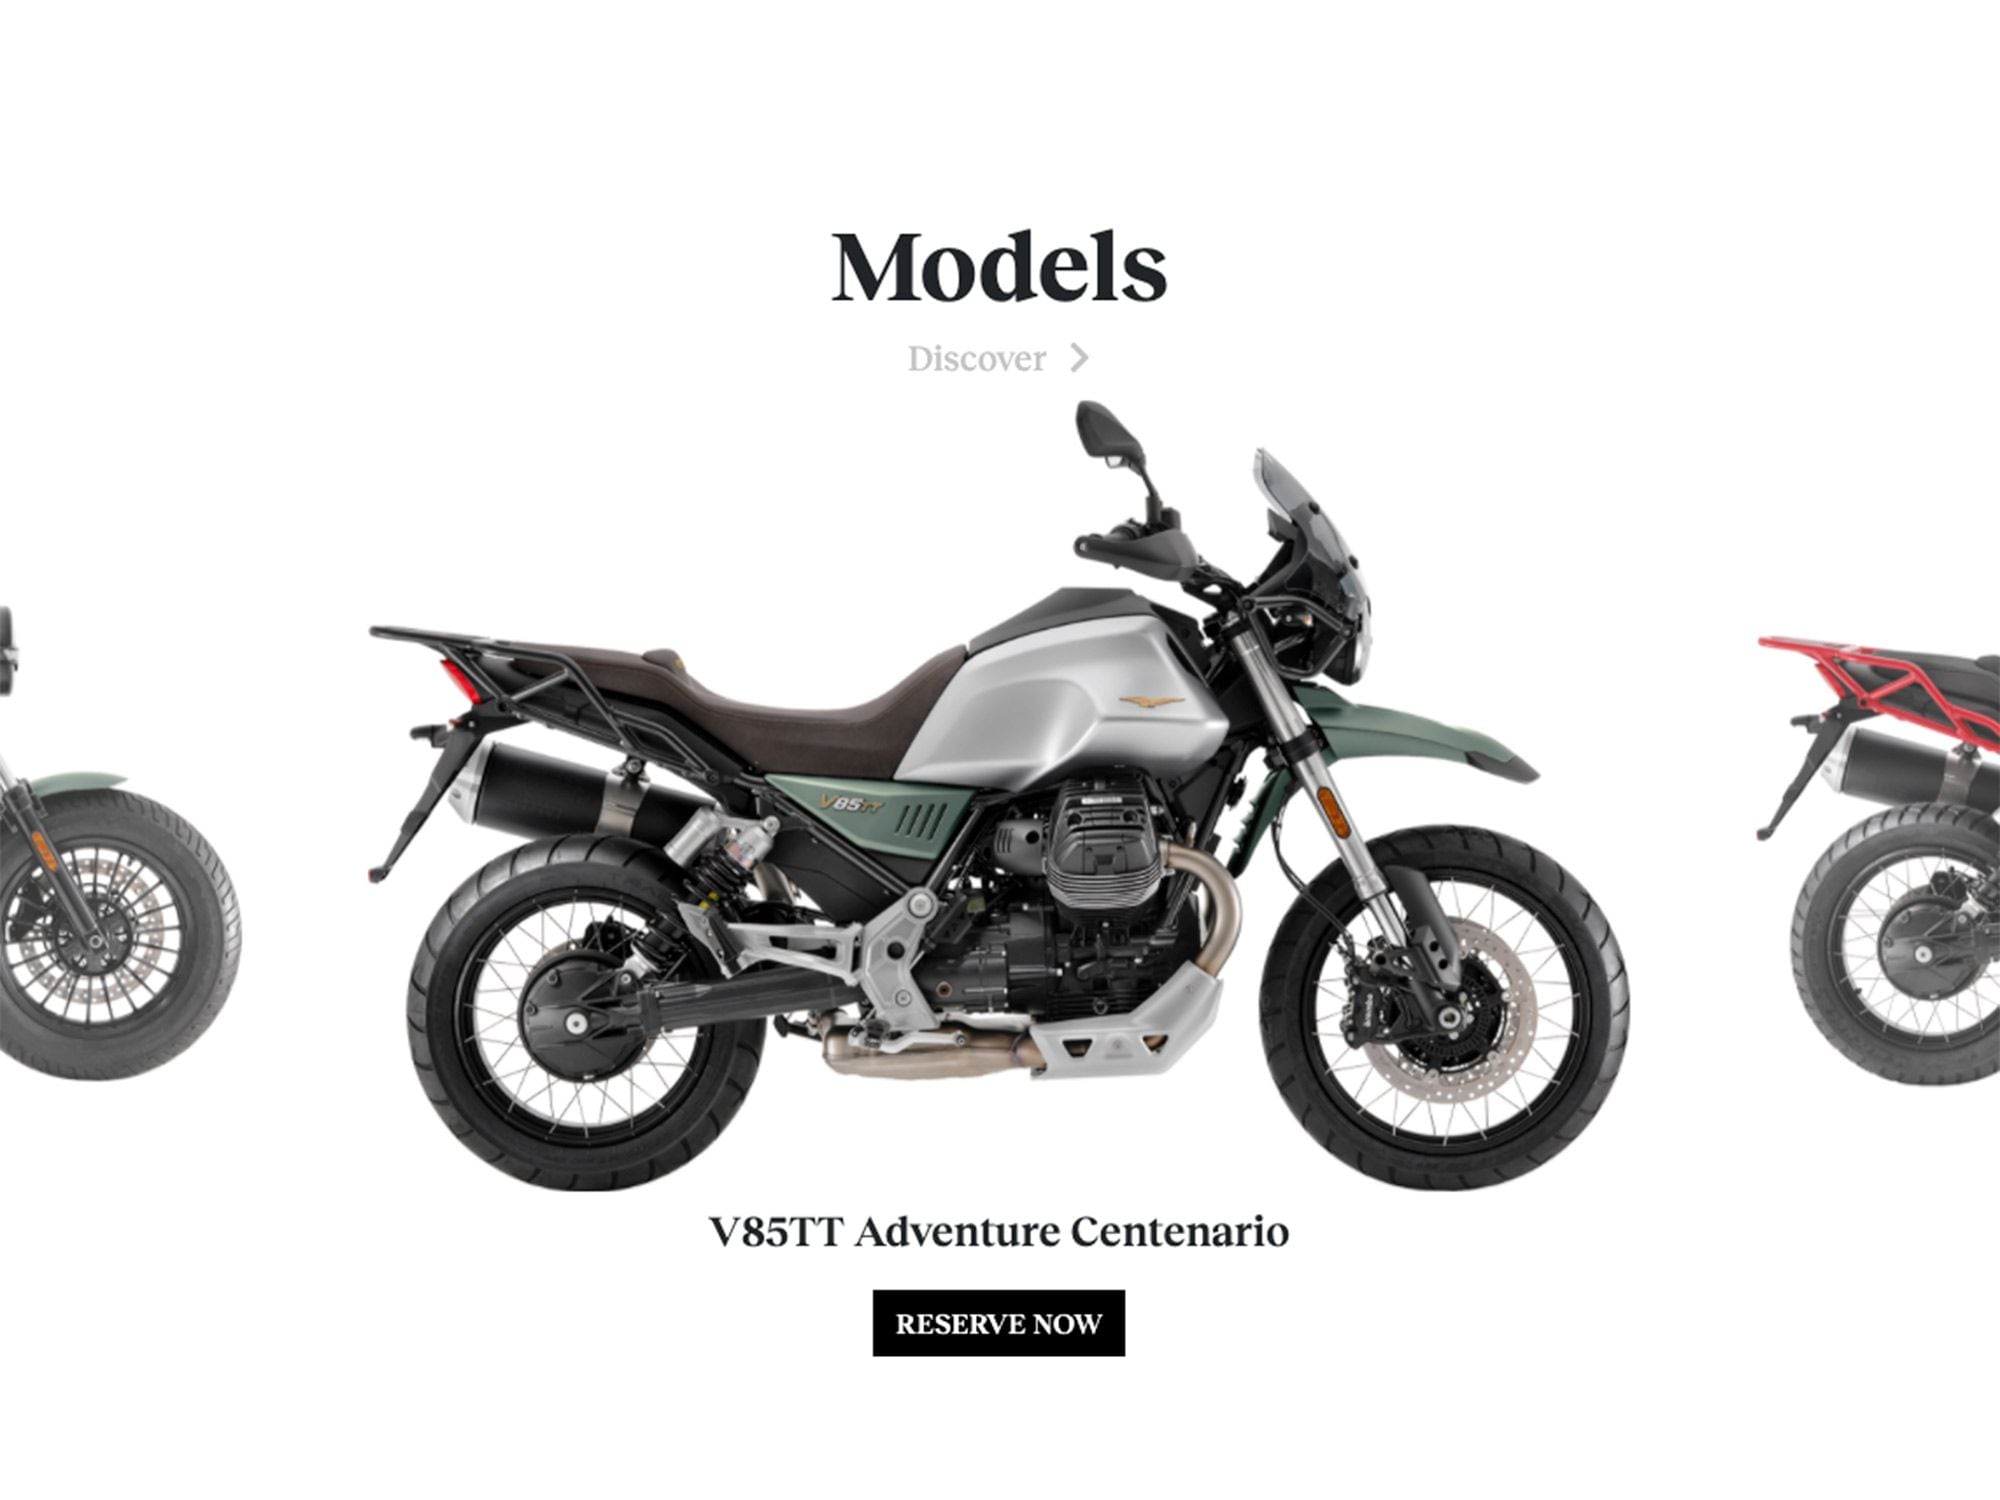 On Moto Guzzi USA’s new online store you can check out the latest models, like the special editions celebrating the brand’s 100th anniversary this year.